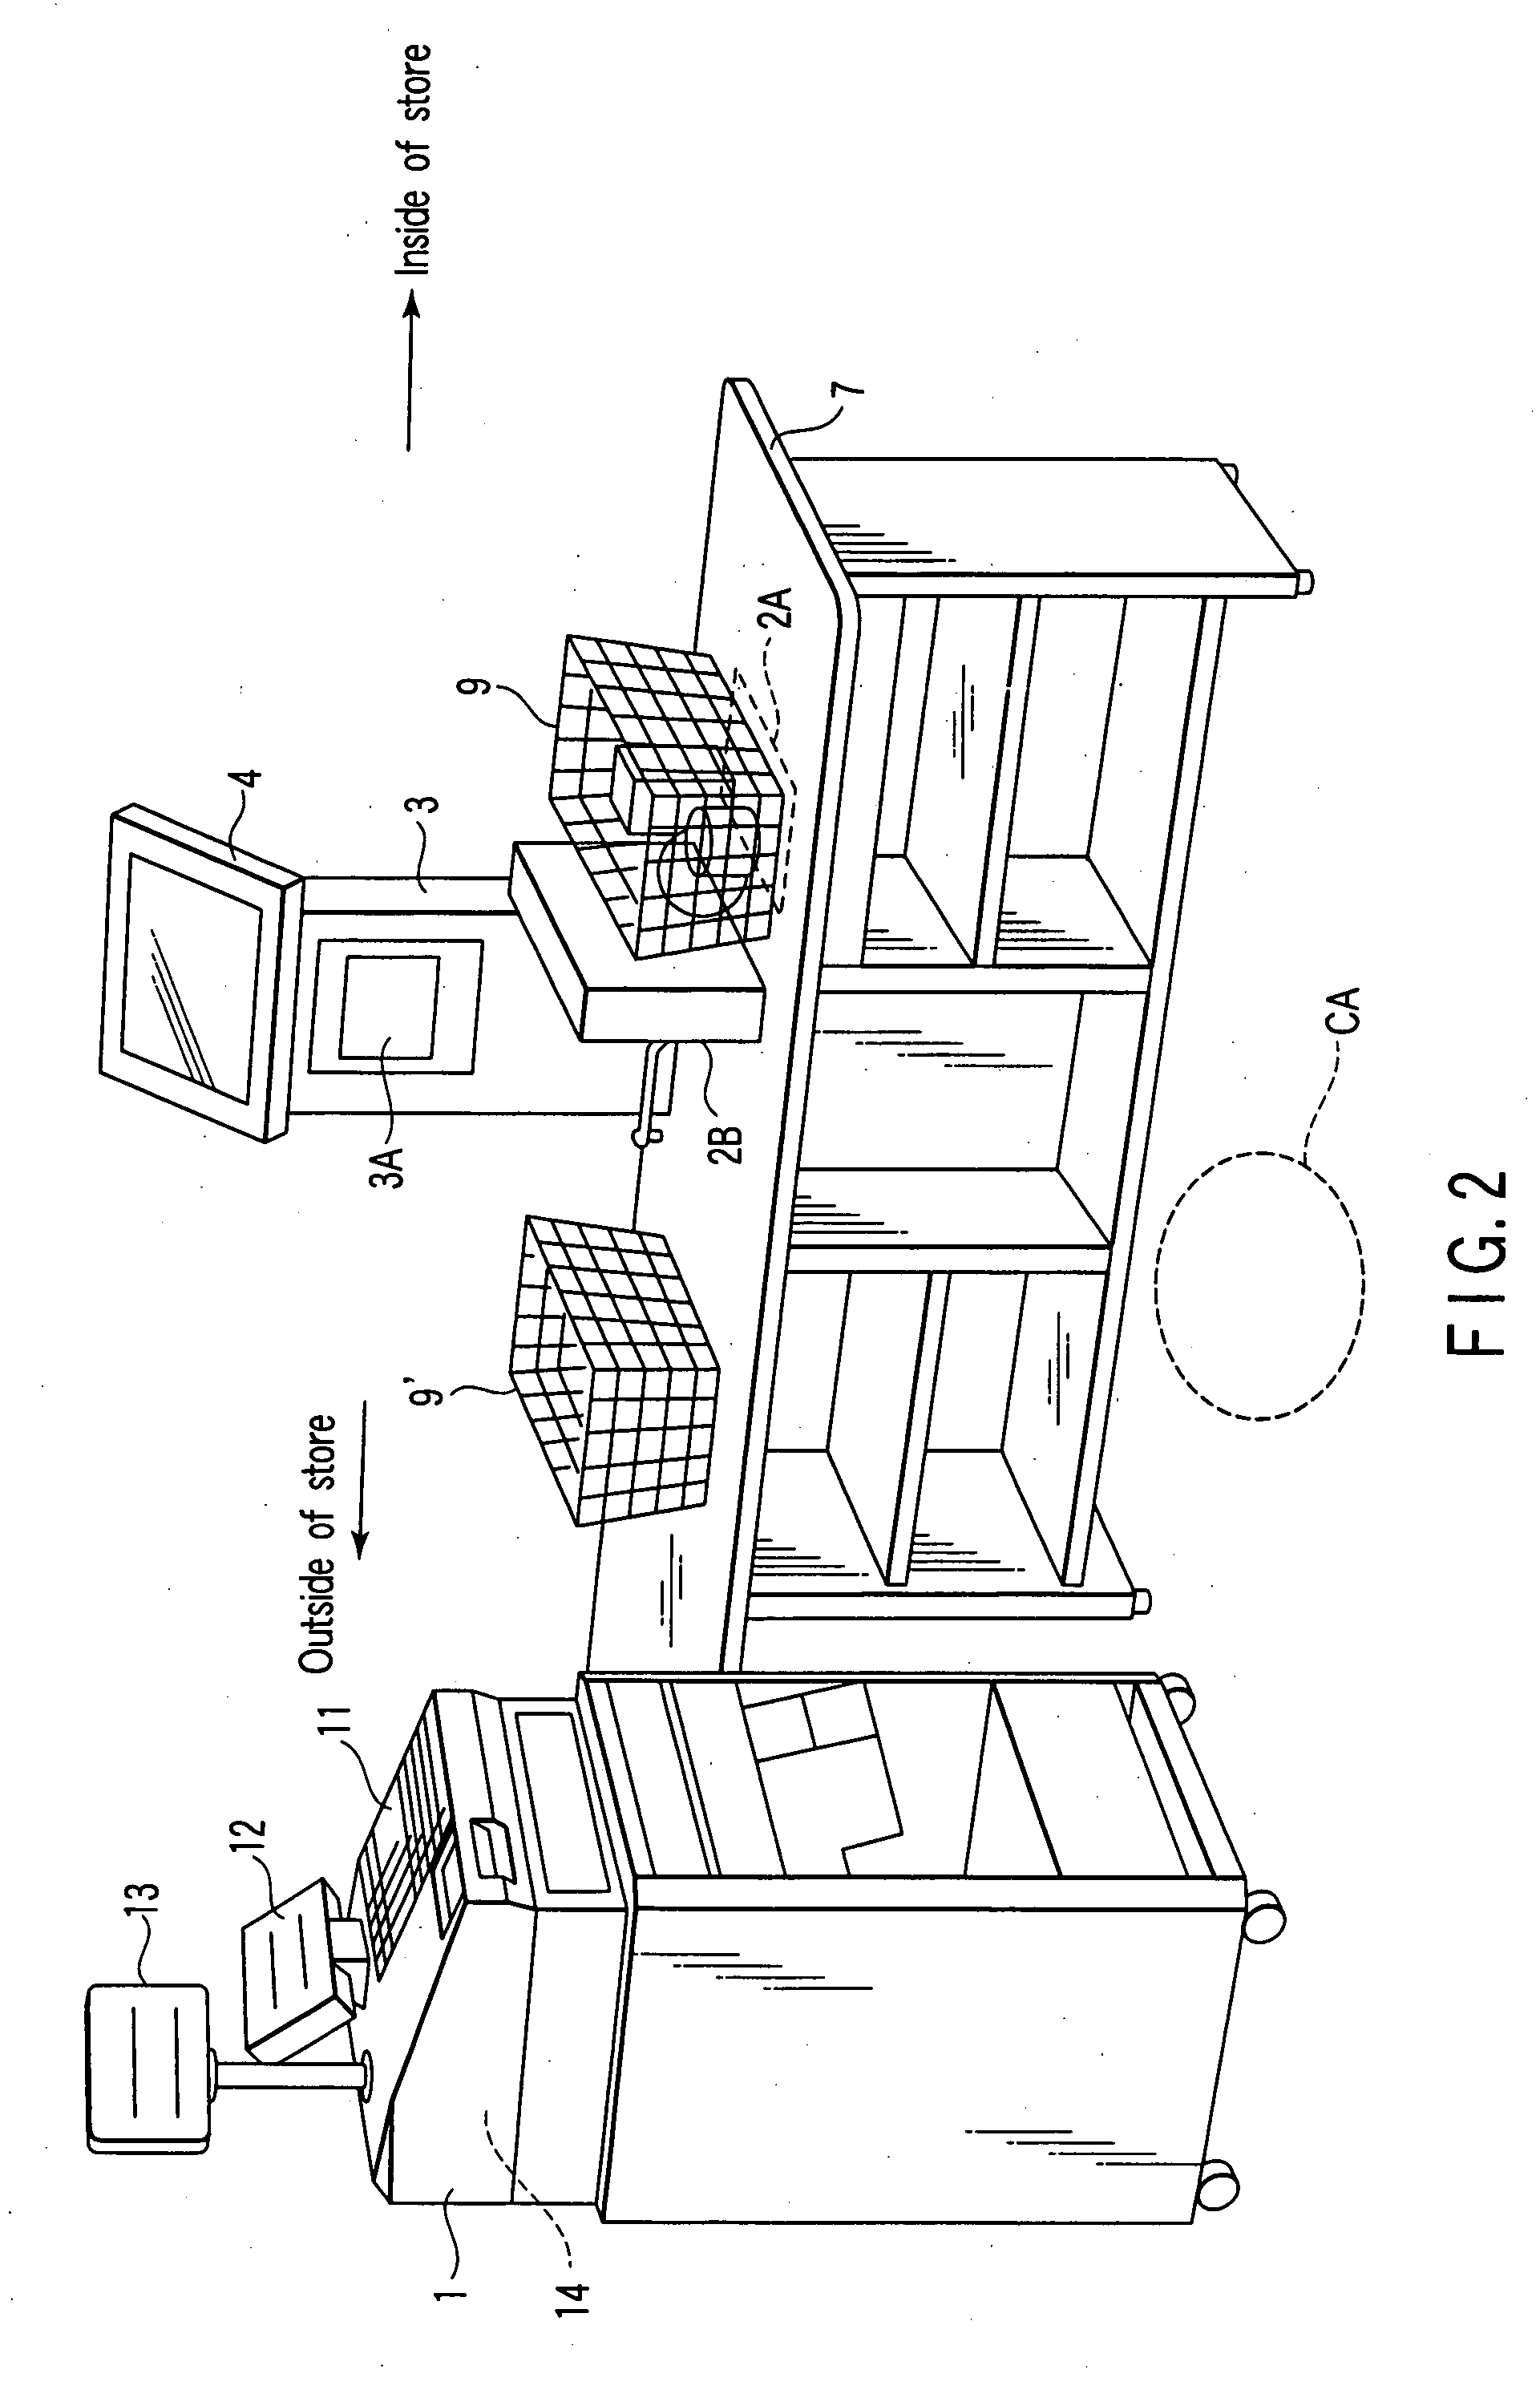 Commodity sales registration processing system and commodity information registering apparatus